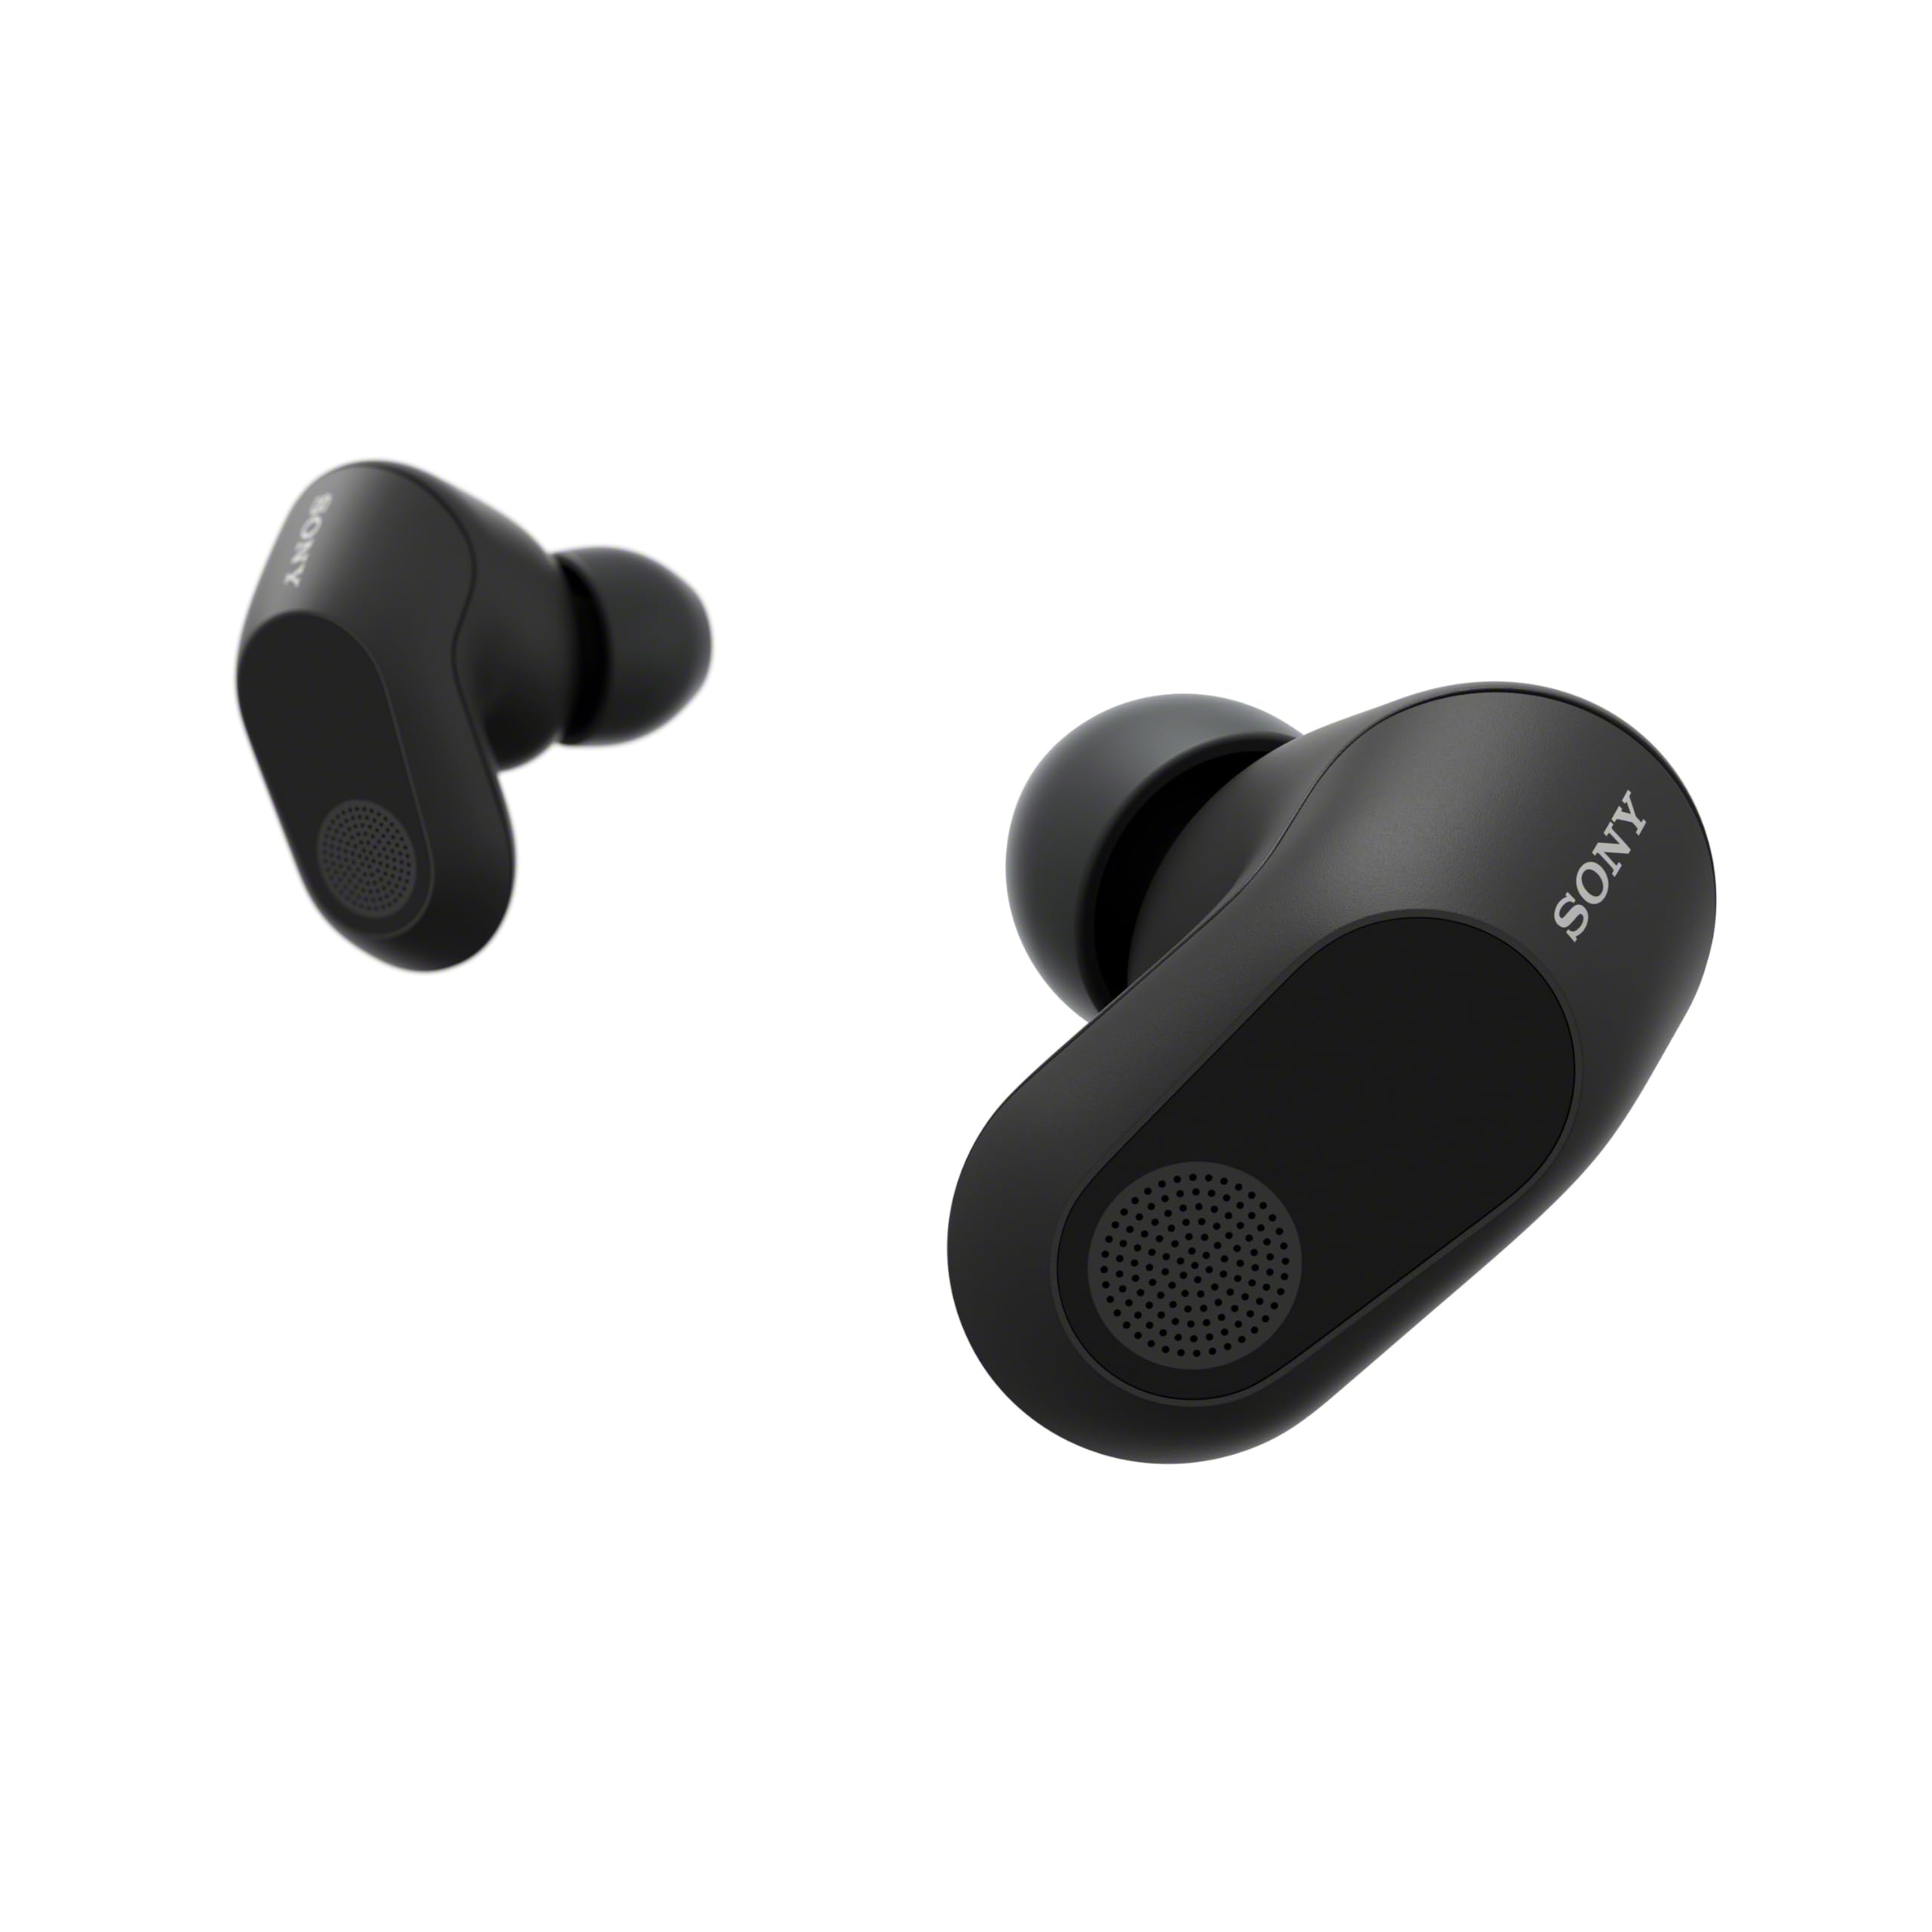 Sony INZONE Buds Truly Wireless Noise Cancelling Gaming Earbuds, 12 Hour Battery, for PC, PS5, 360 Spatial Sound, 30ms Low Latency, USB-C Dongle and Bluetooth 5.3, WF-G700N Black